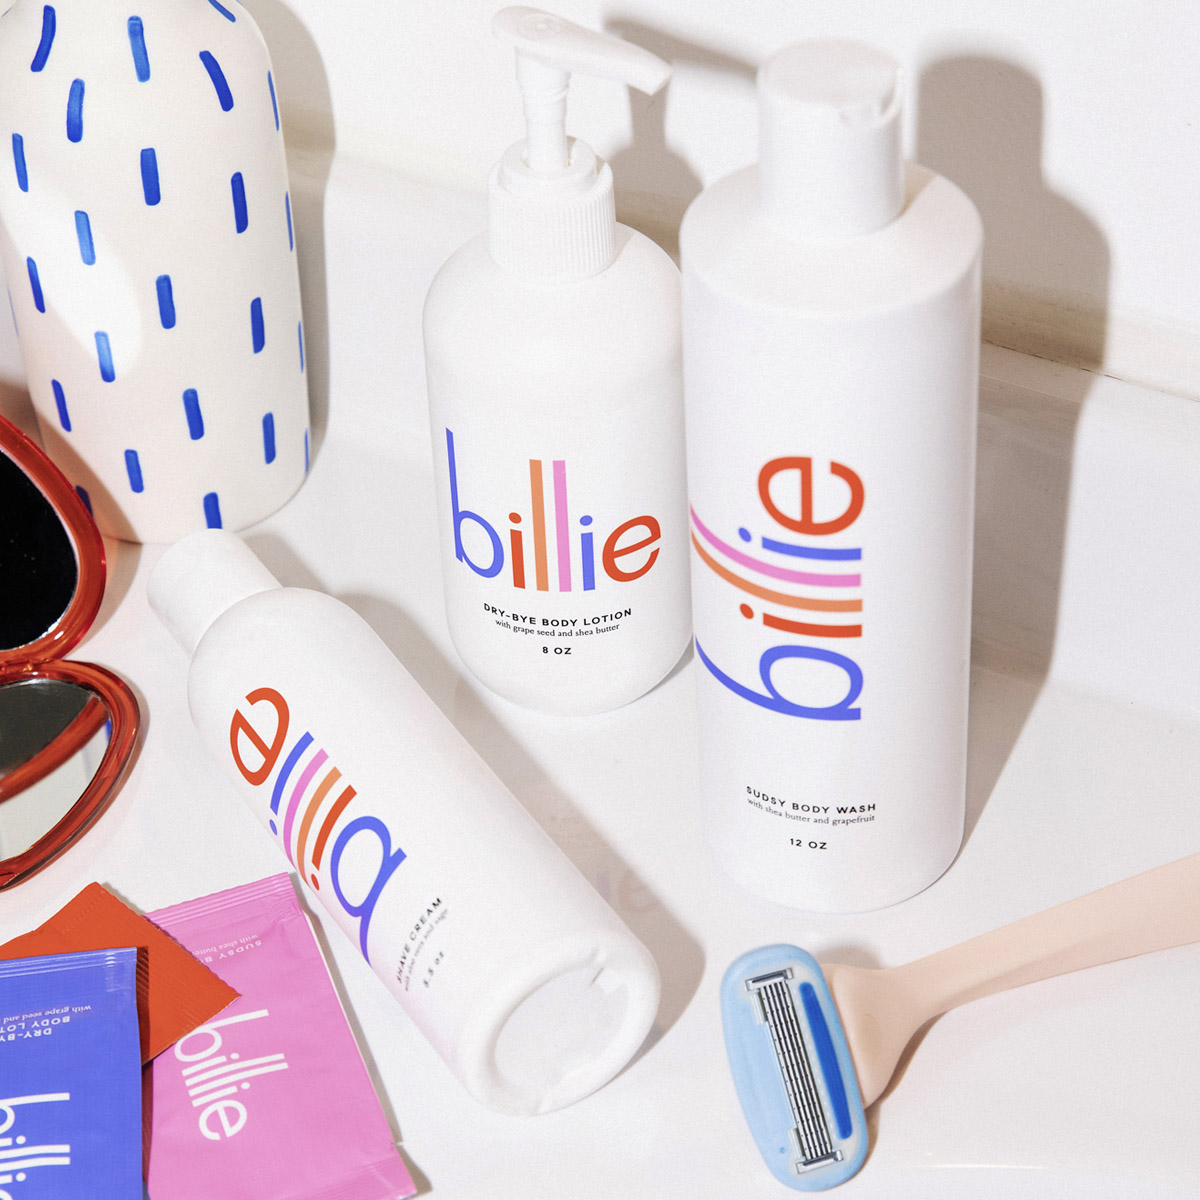 Billie products. (Courtesy of Billie)